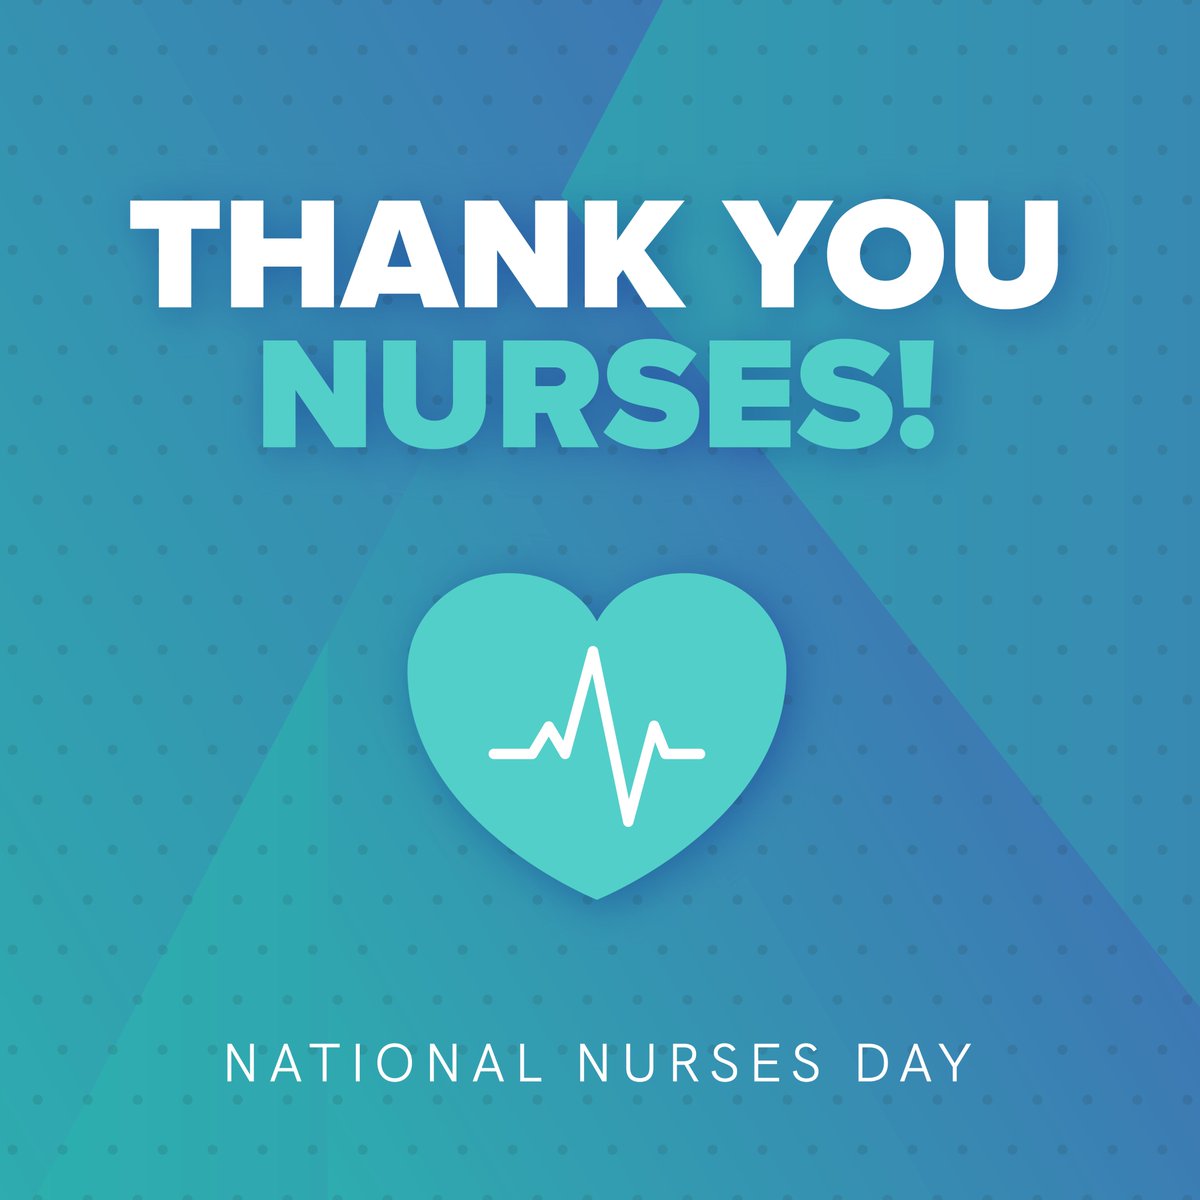 Happy National Nurses Day! My mom was a nurse for over 40 years, so I know firsthand the dedication and compassion they pour into their work every day. Thank you for all you do to support families and provide quality care for your patients. What you do is so important!